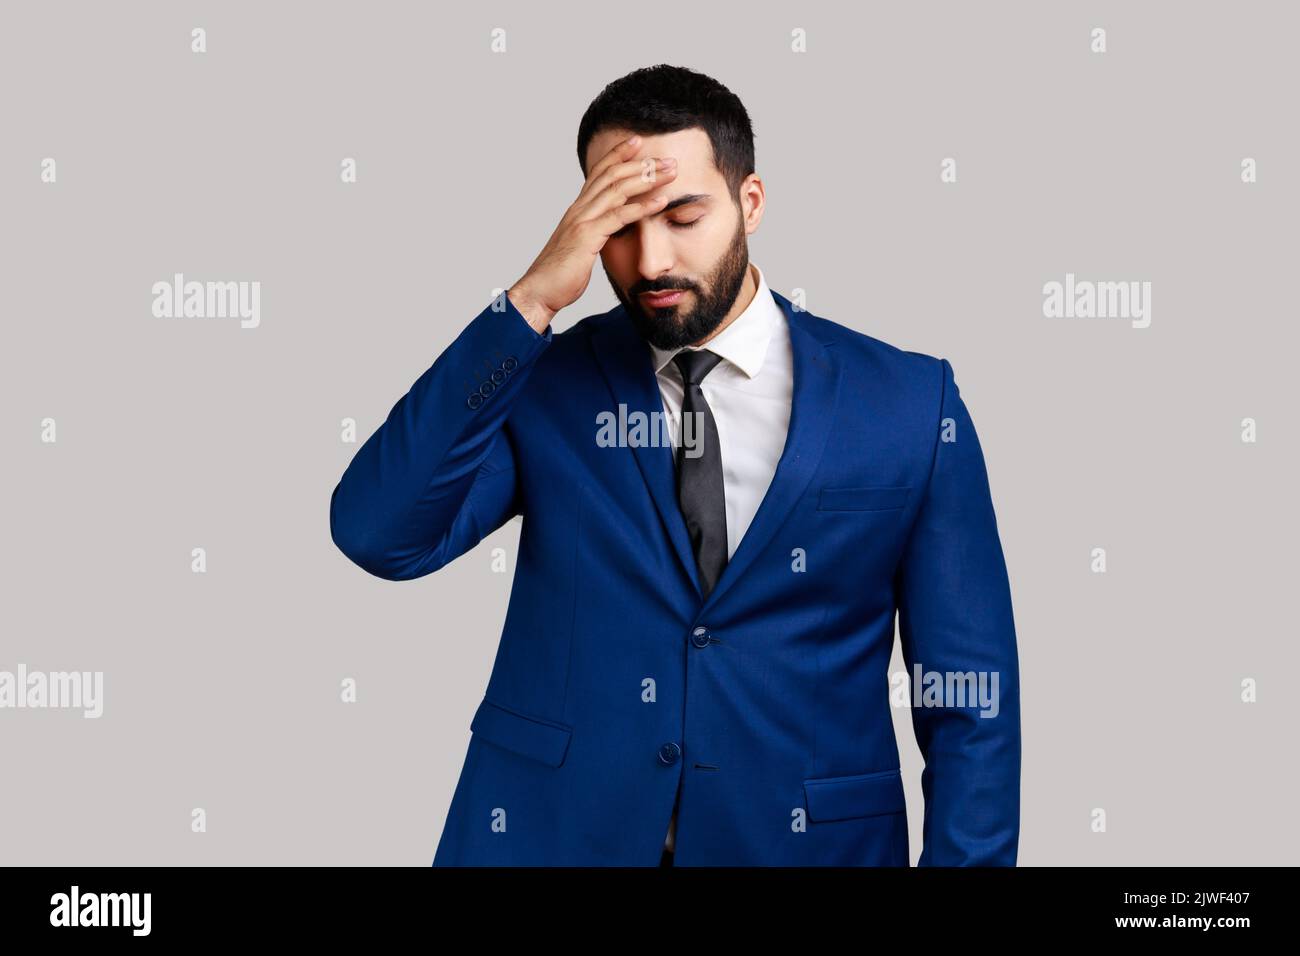 Depressed bearded man making facepalm gesture, feeling regret and shame about forgotten event, bad memory, wearing official style suit. Indoor studio shot isolated on gray background. Stock Photo